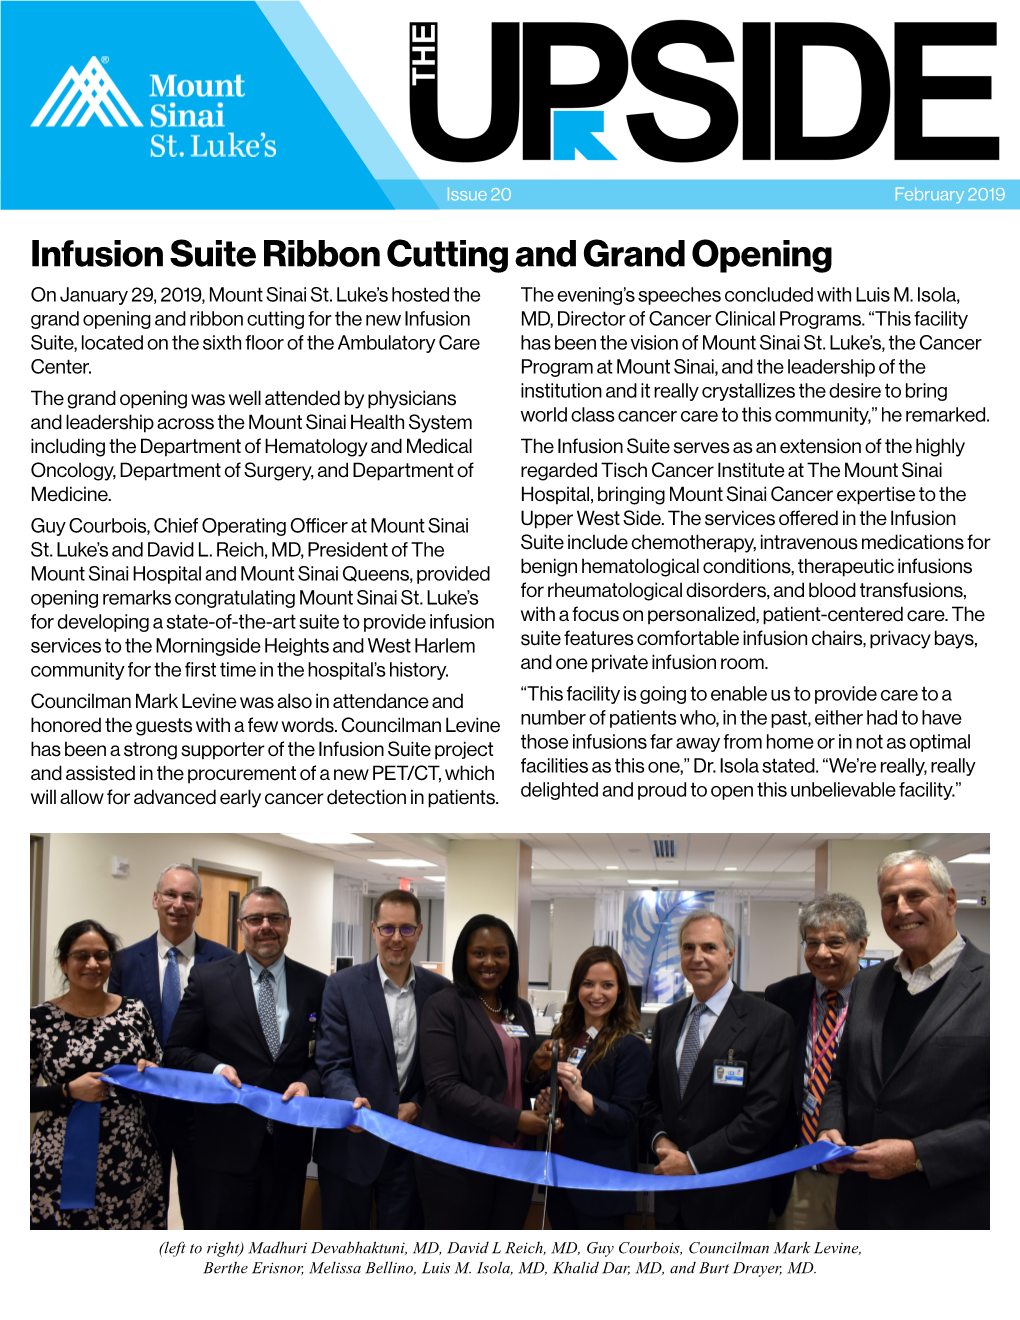 Infusion Suite Ribbon Cutting and Grand Opening on January 29, 2019, Mount Sinai St